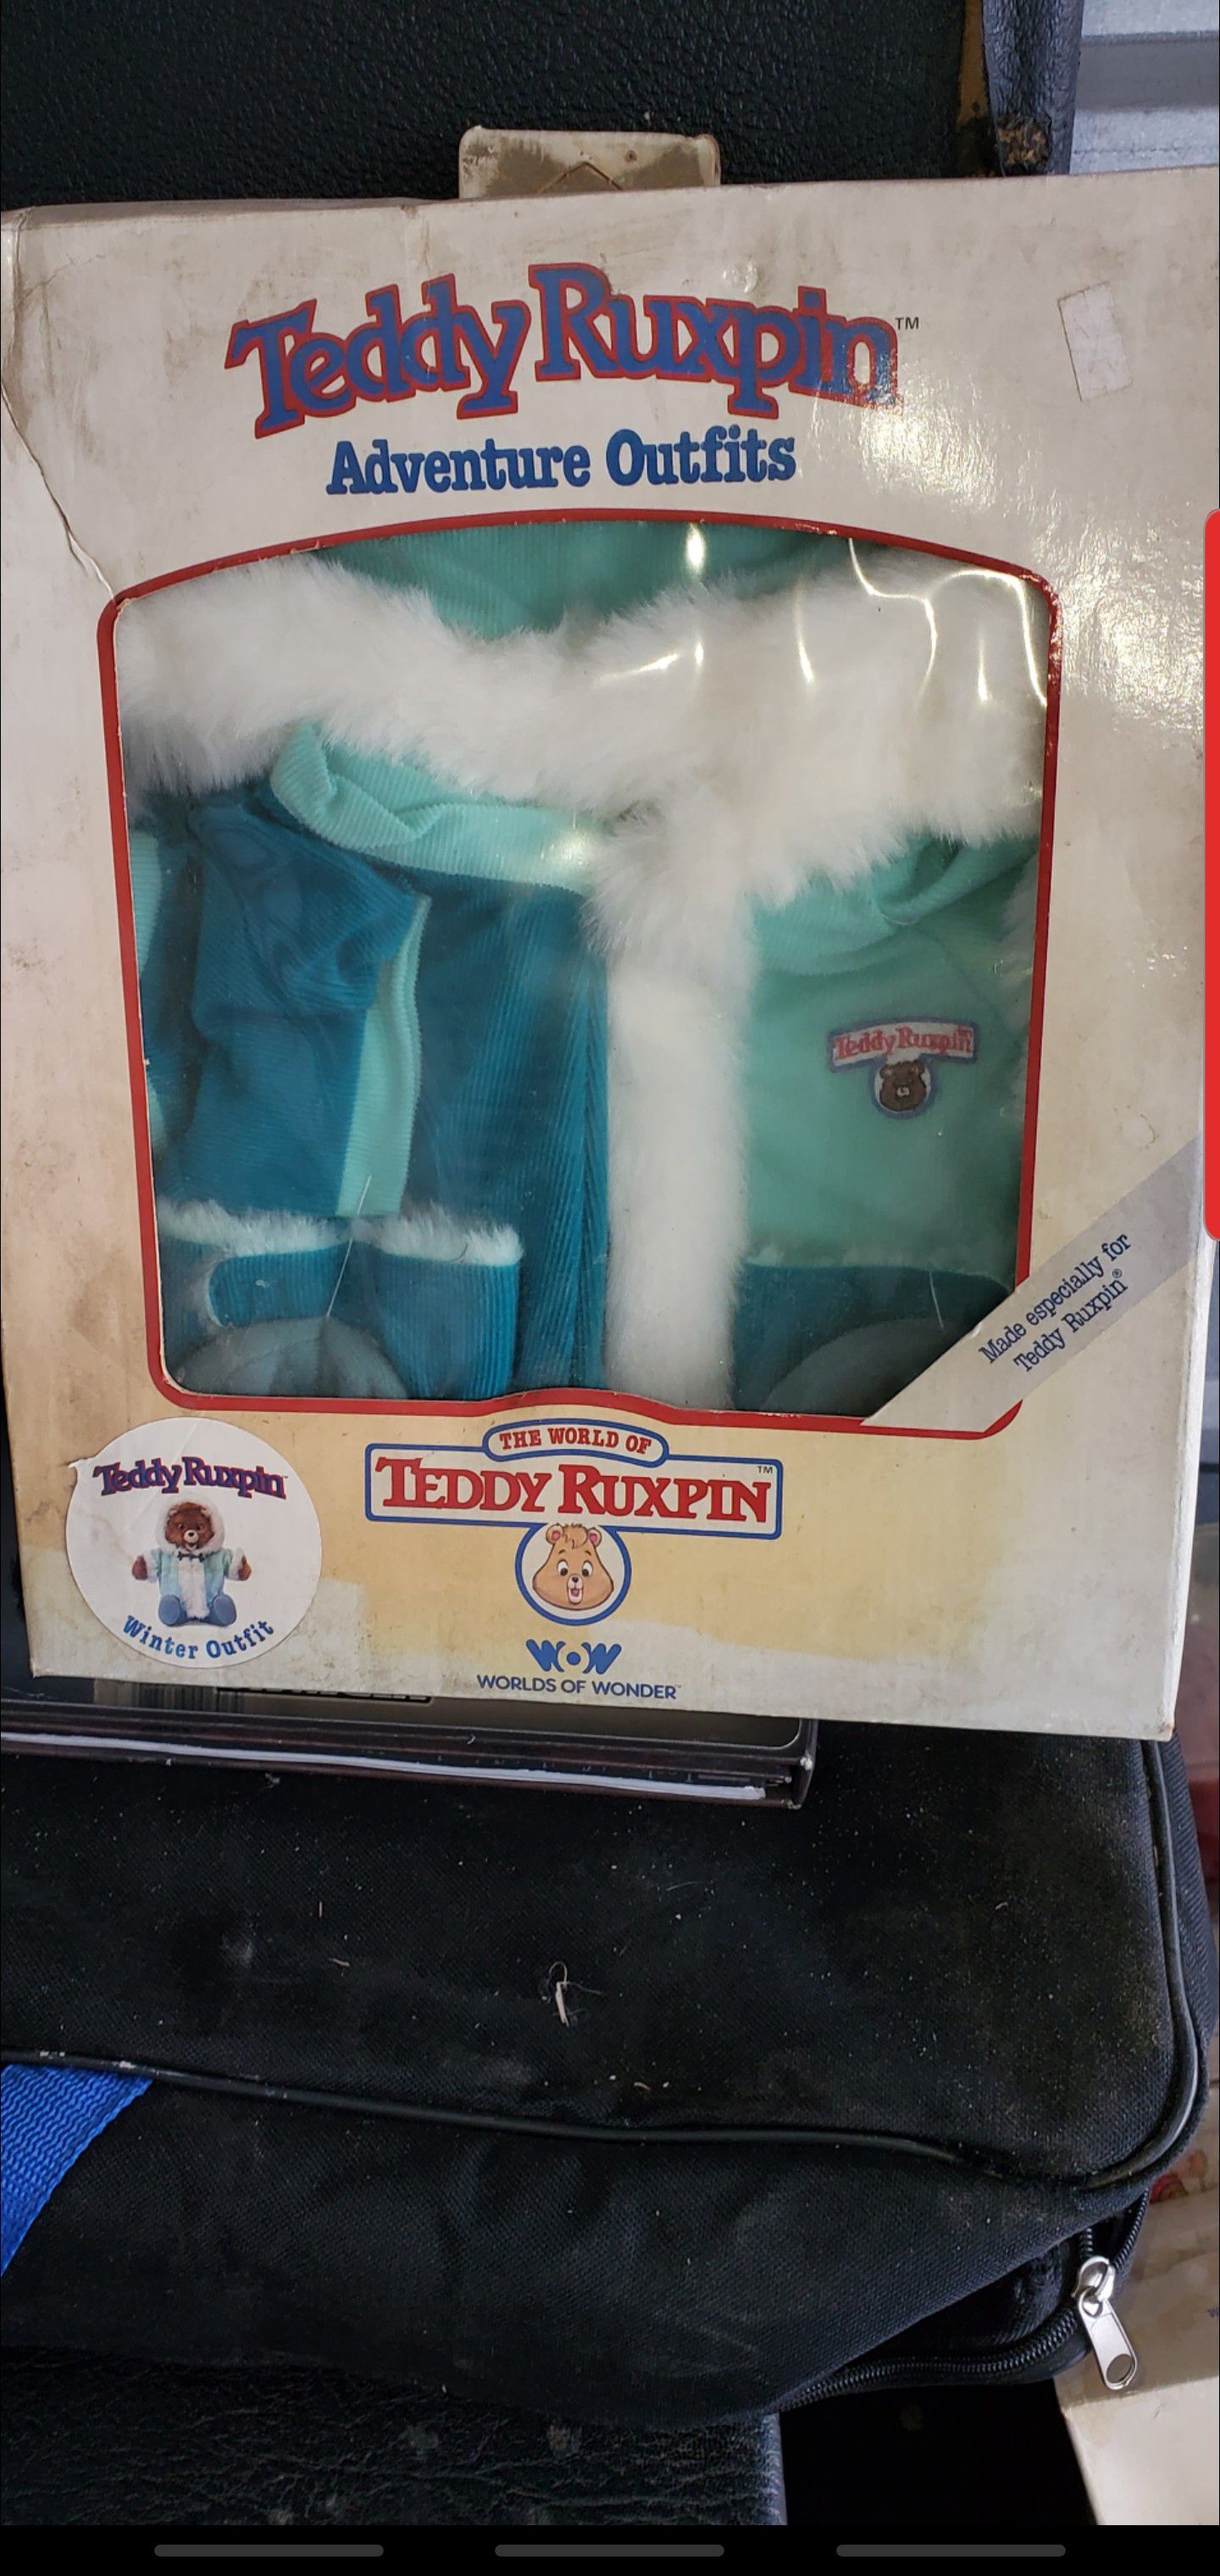 Teddy Ruxpin Vintage outfits